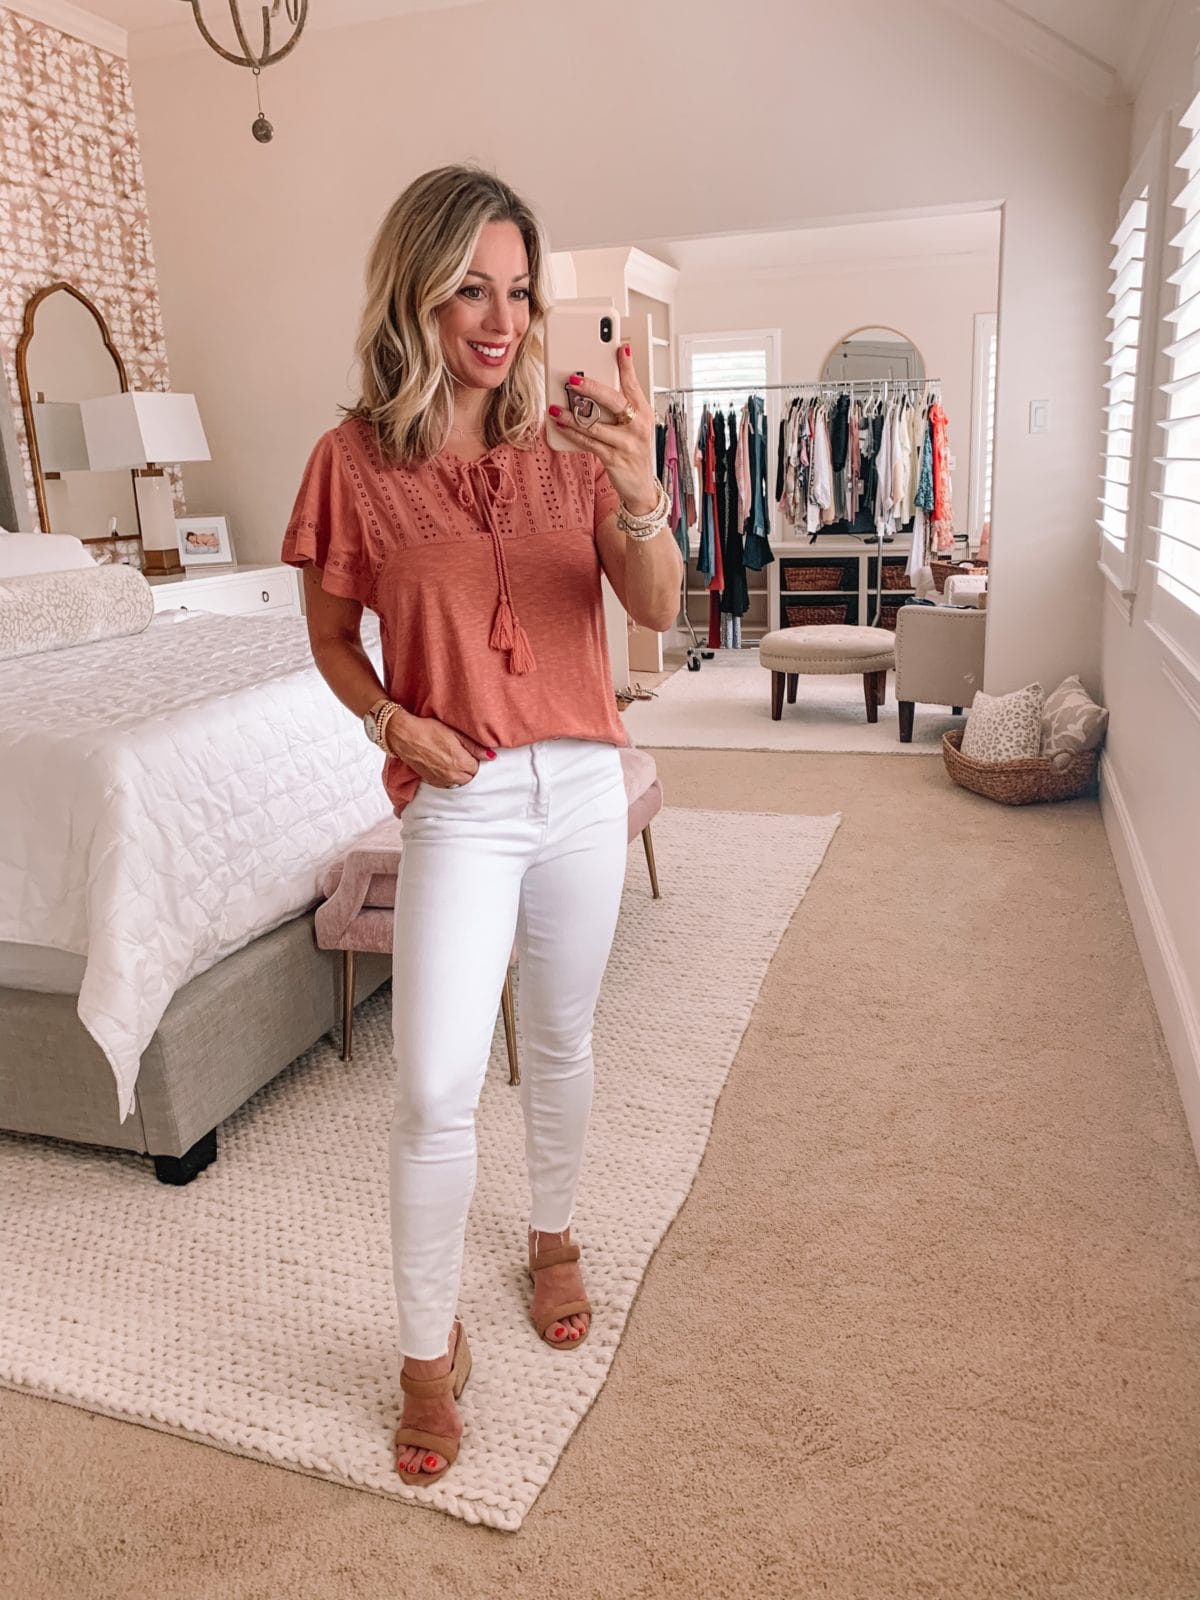 Dressing Room Finds Nordstrom and Target, Crochet Tee, Kut from Kloth Skinny White Jeans, Sandals